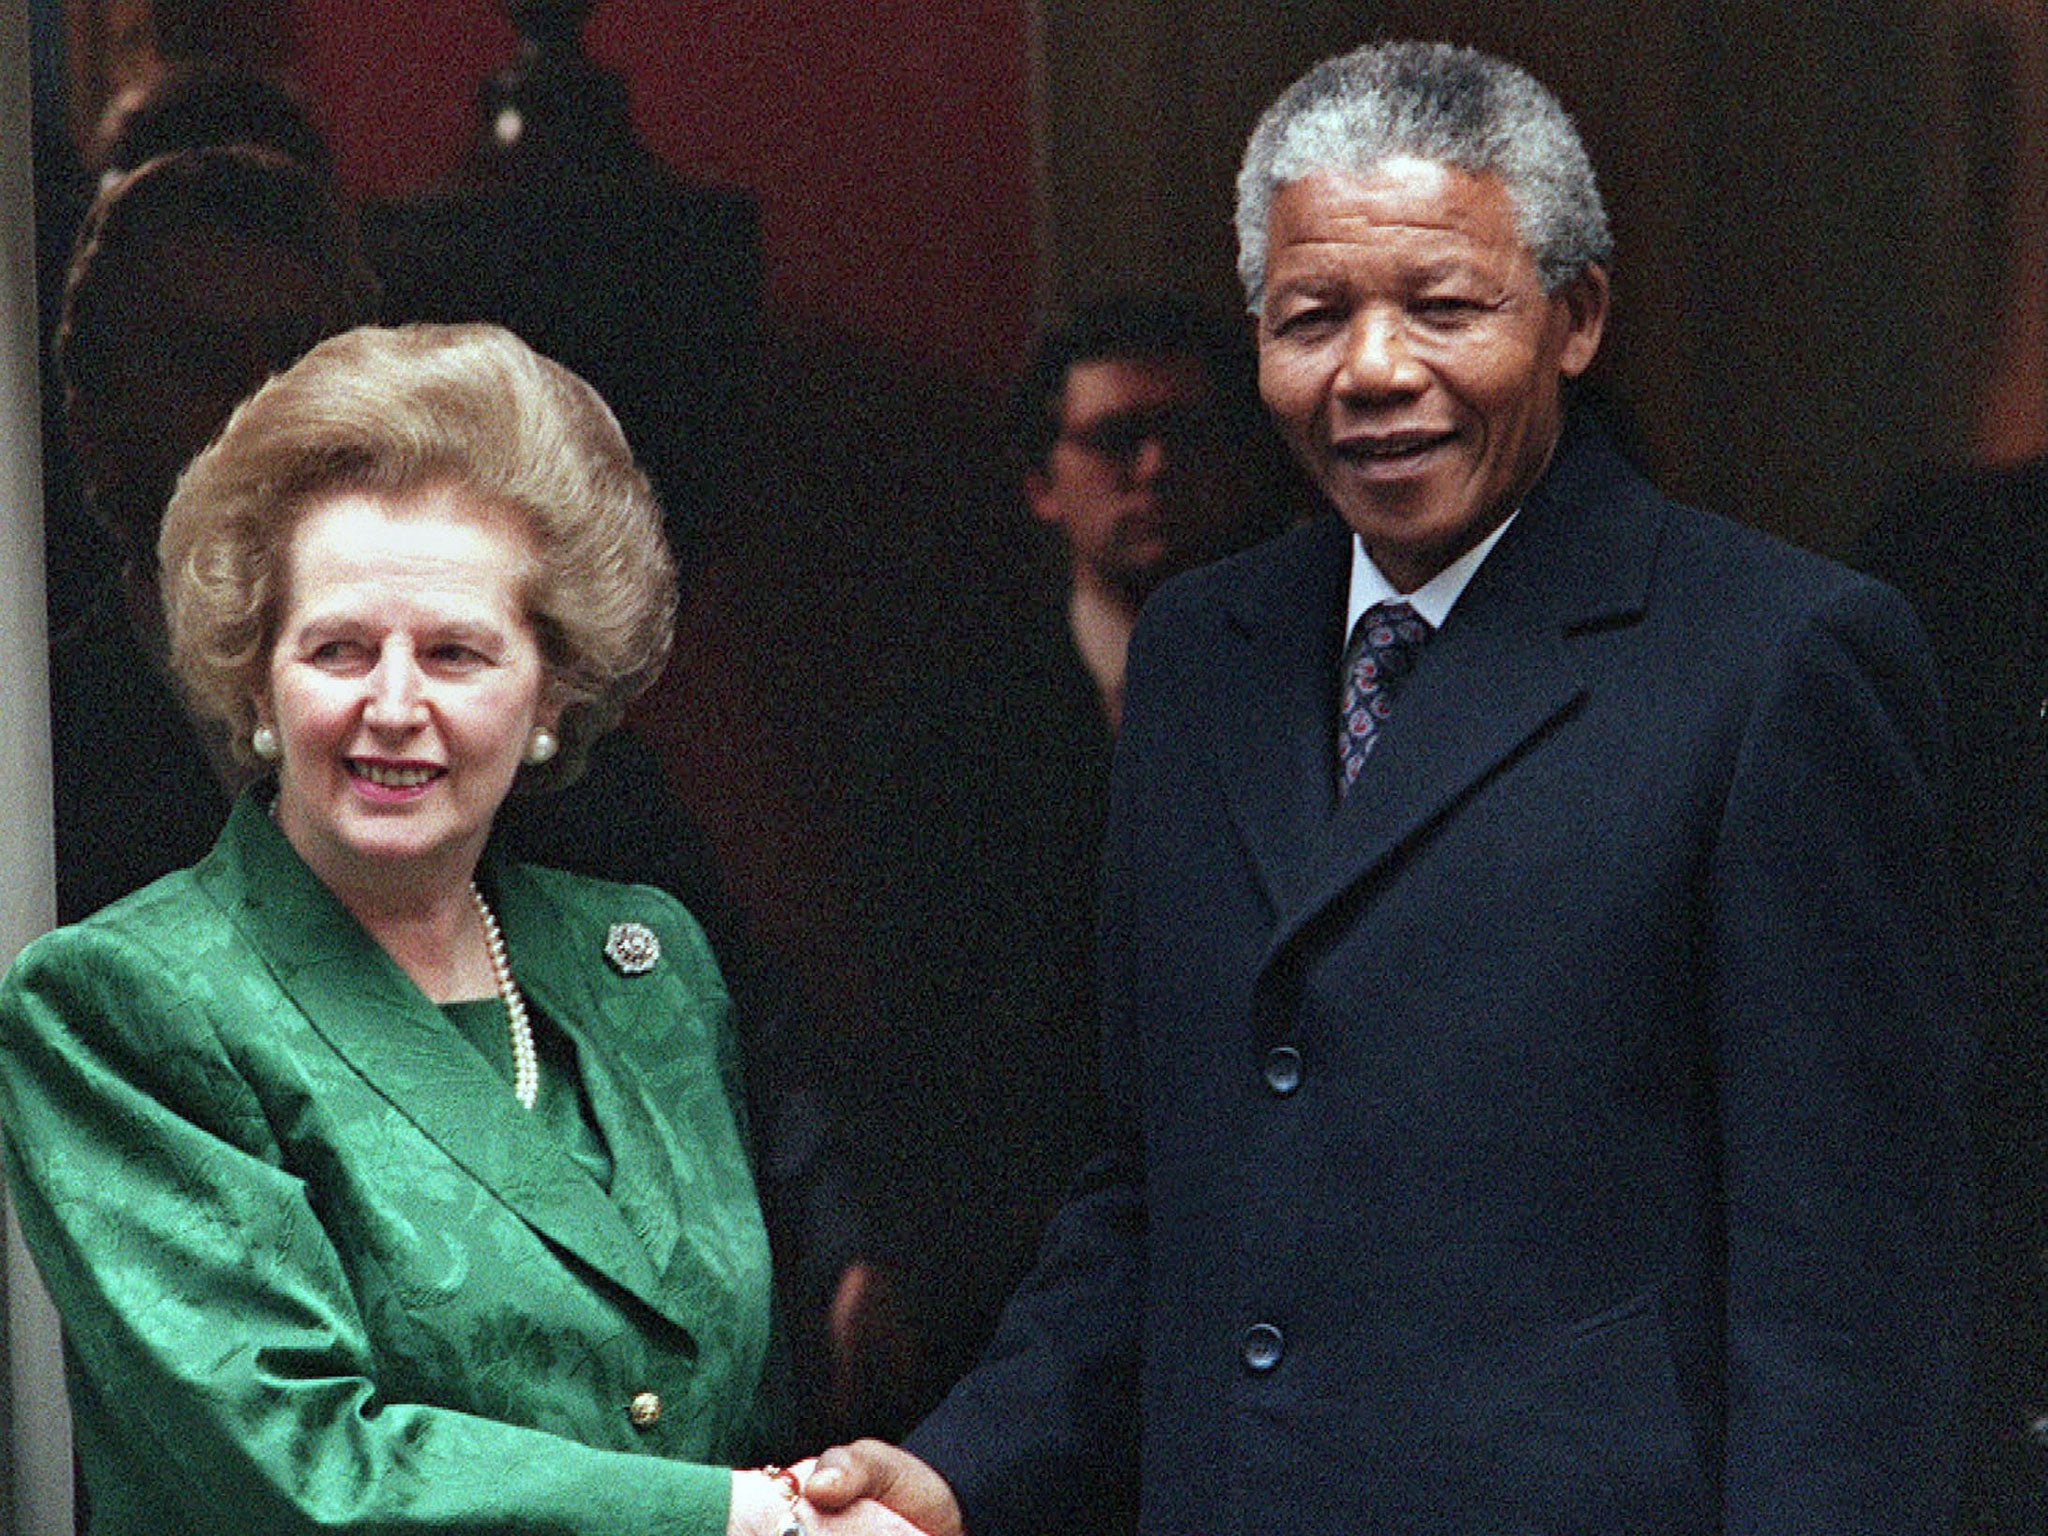 Thatcher, pictured with Mandela in 1990, viewed the ANC as revolutionary socialists